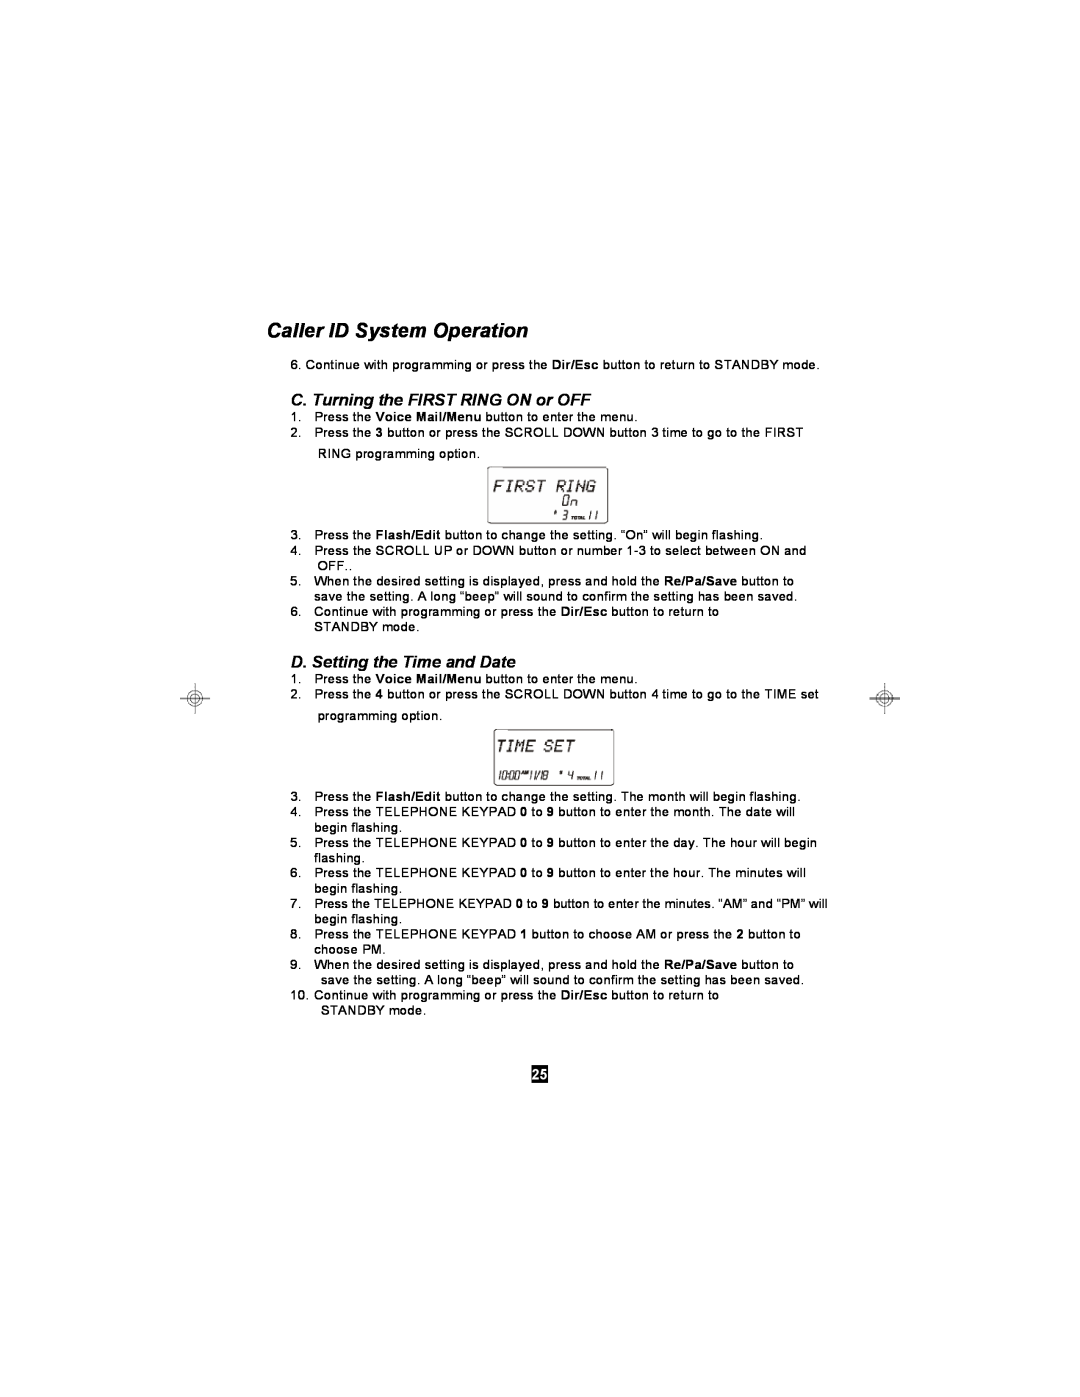 Curtis TC595 owner manual C. Turning the FIRST RING ON or OFF, D. Setting the Time and Date, Caller ID System Operation 